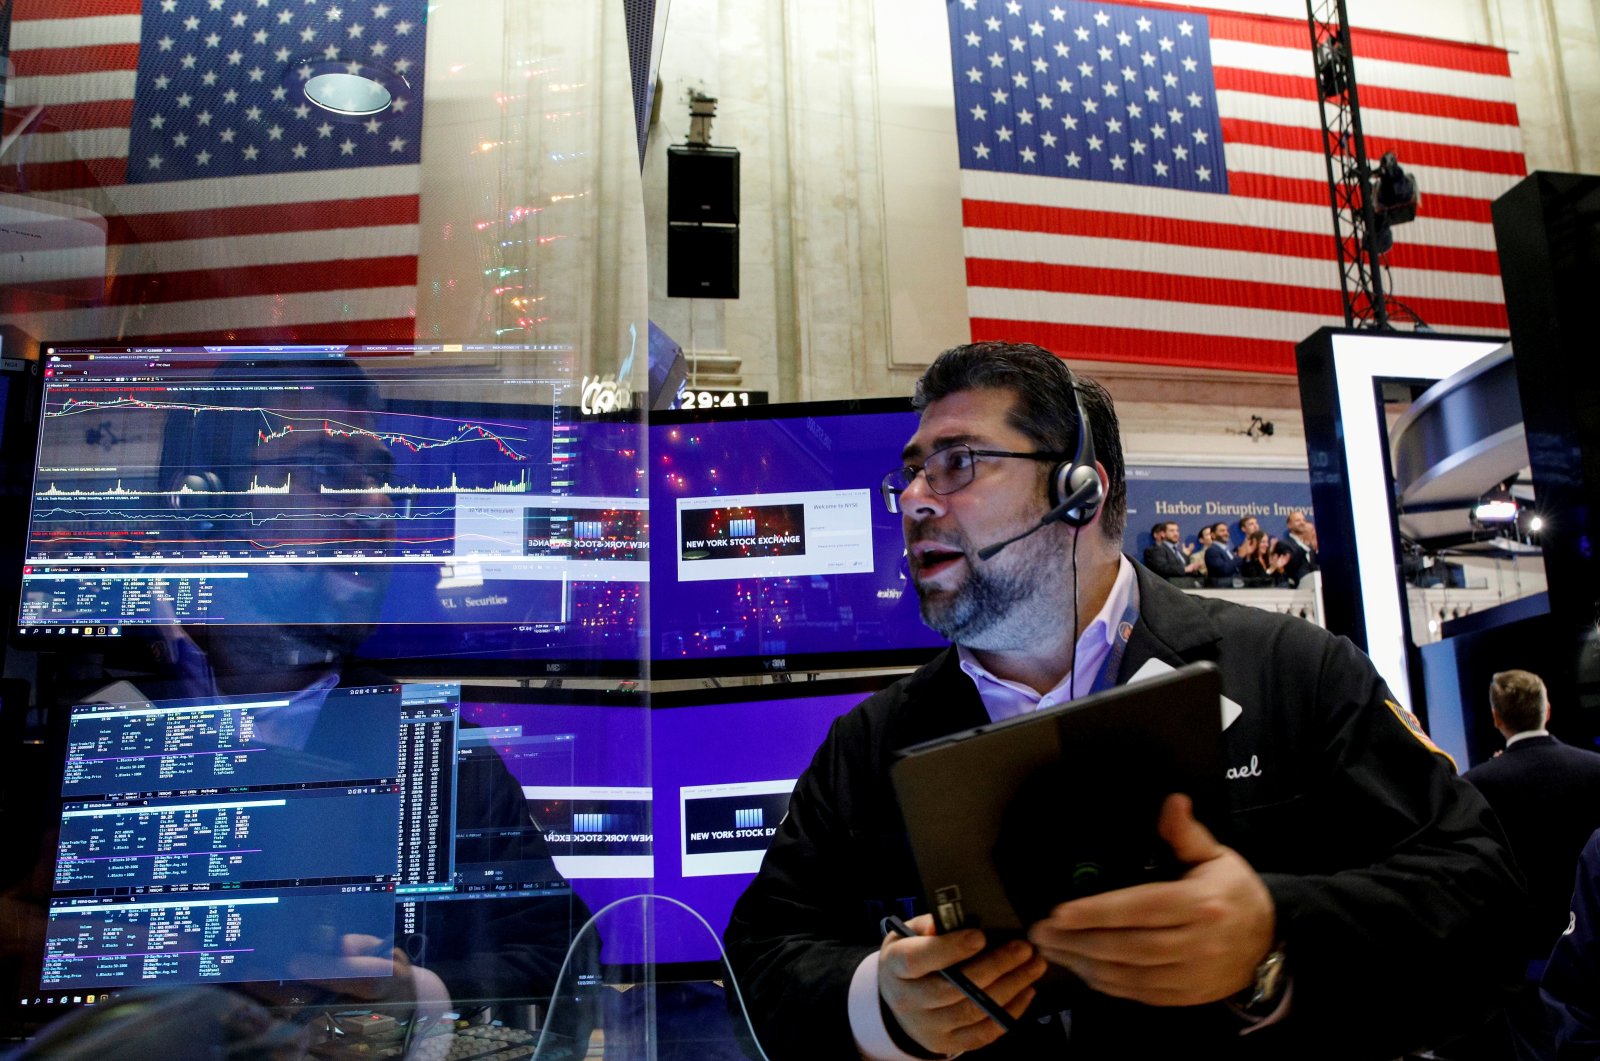 A trader works on the floor of the New York Stock Exchange (NYSE) in New York City, U.S., Dec. 2, 2021. (Reuters Photo)